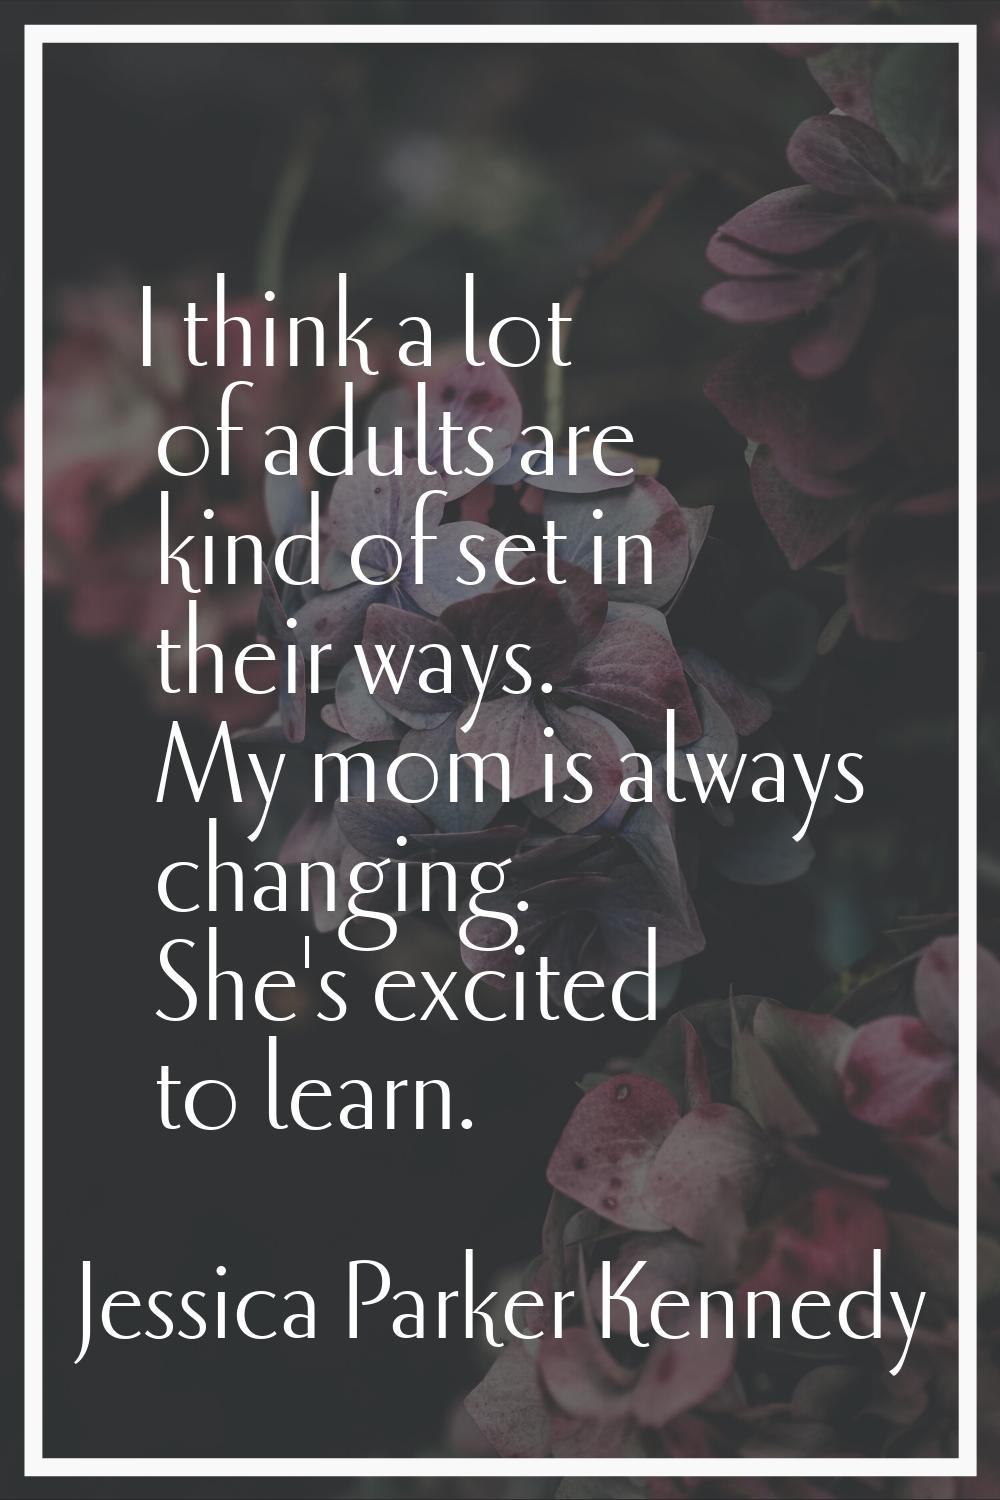 I think a lot of adults are kind of set in their ways. My mom is always changing. She's excited to 